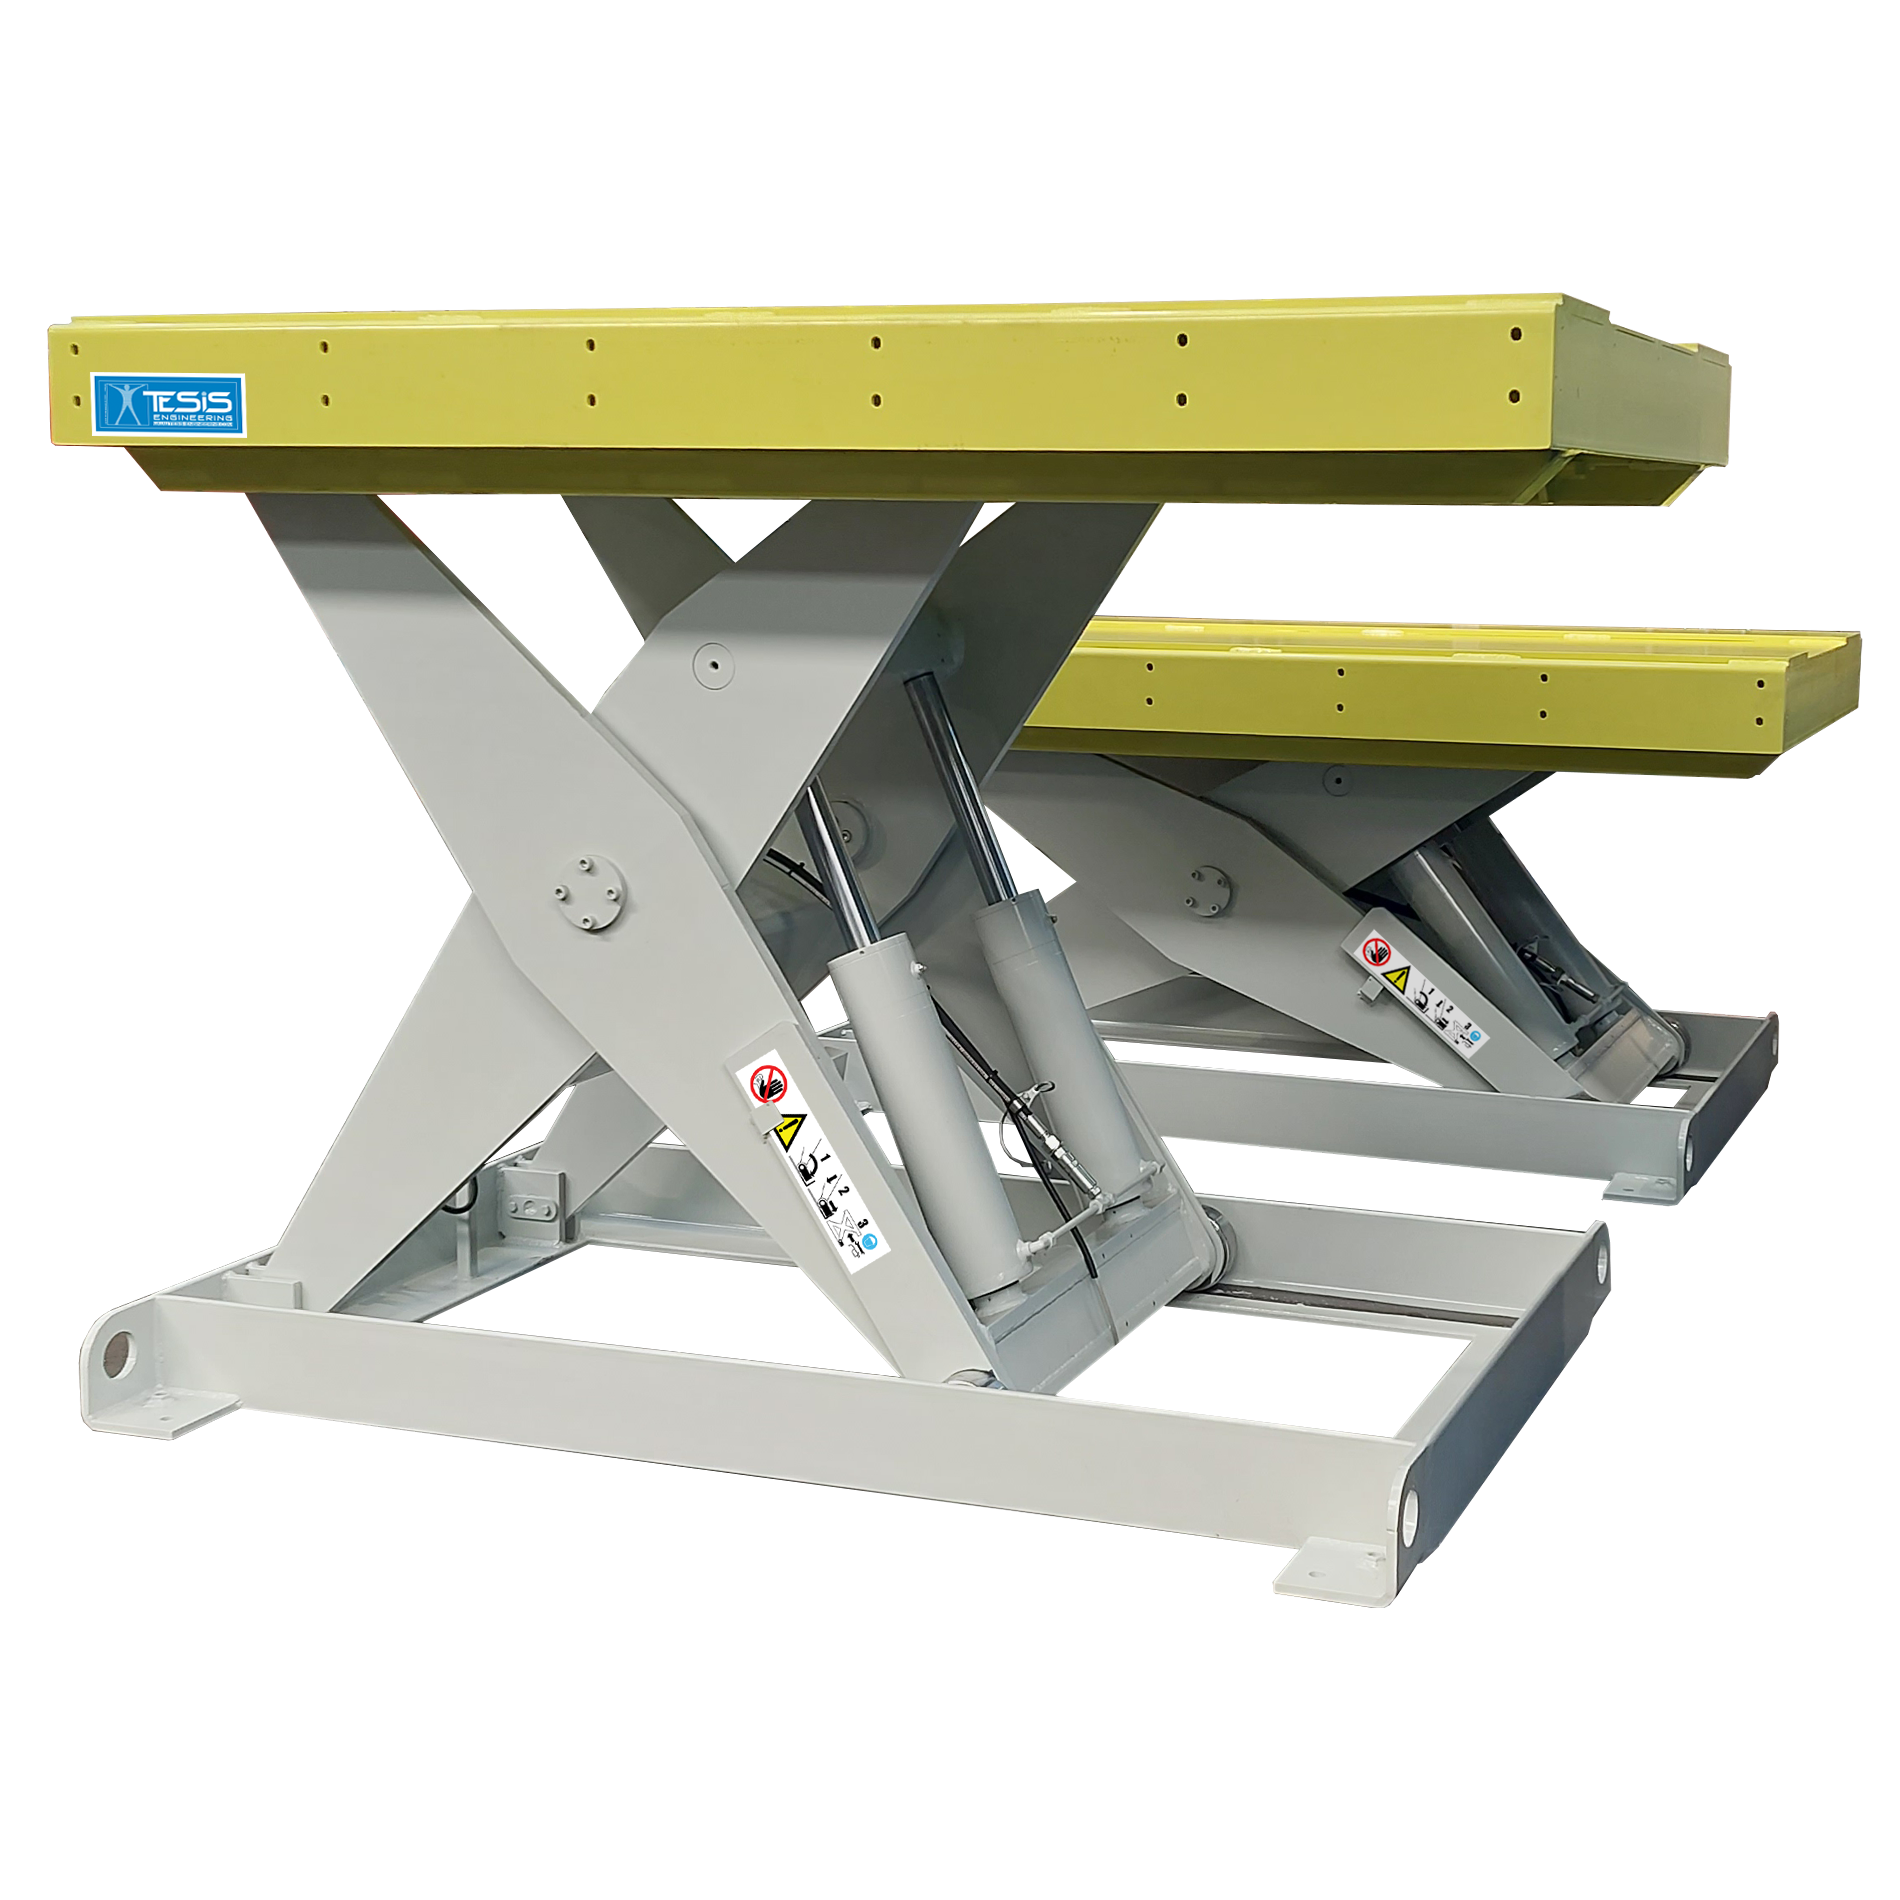 Heavy duty lift table with side walkways bolted to the platform - industrial platform lifts - hydraulic lifting tables 